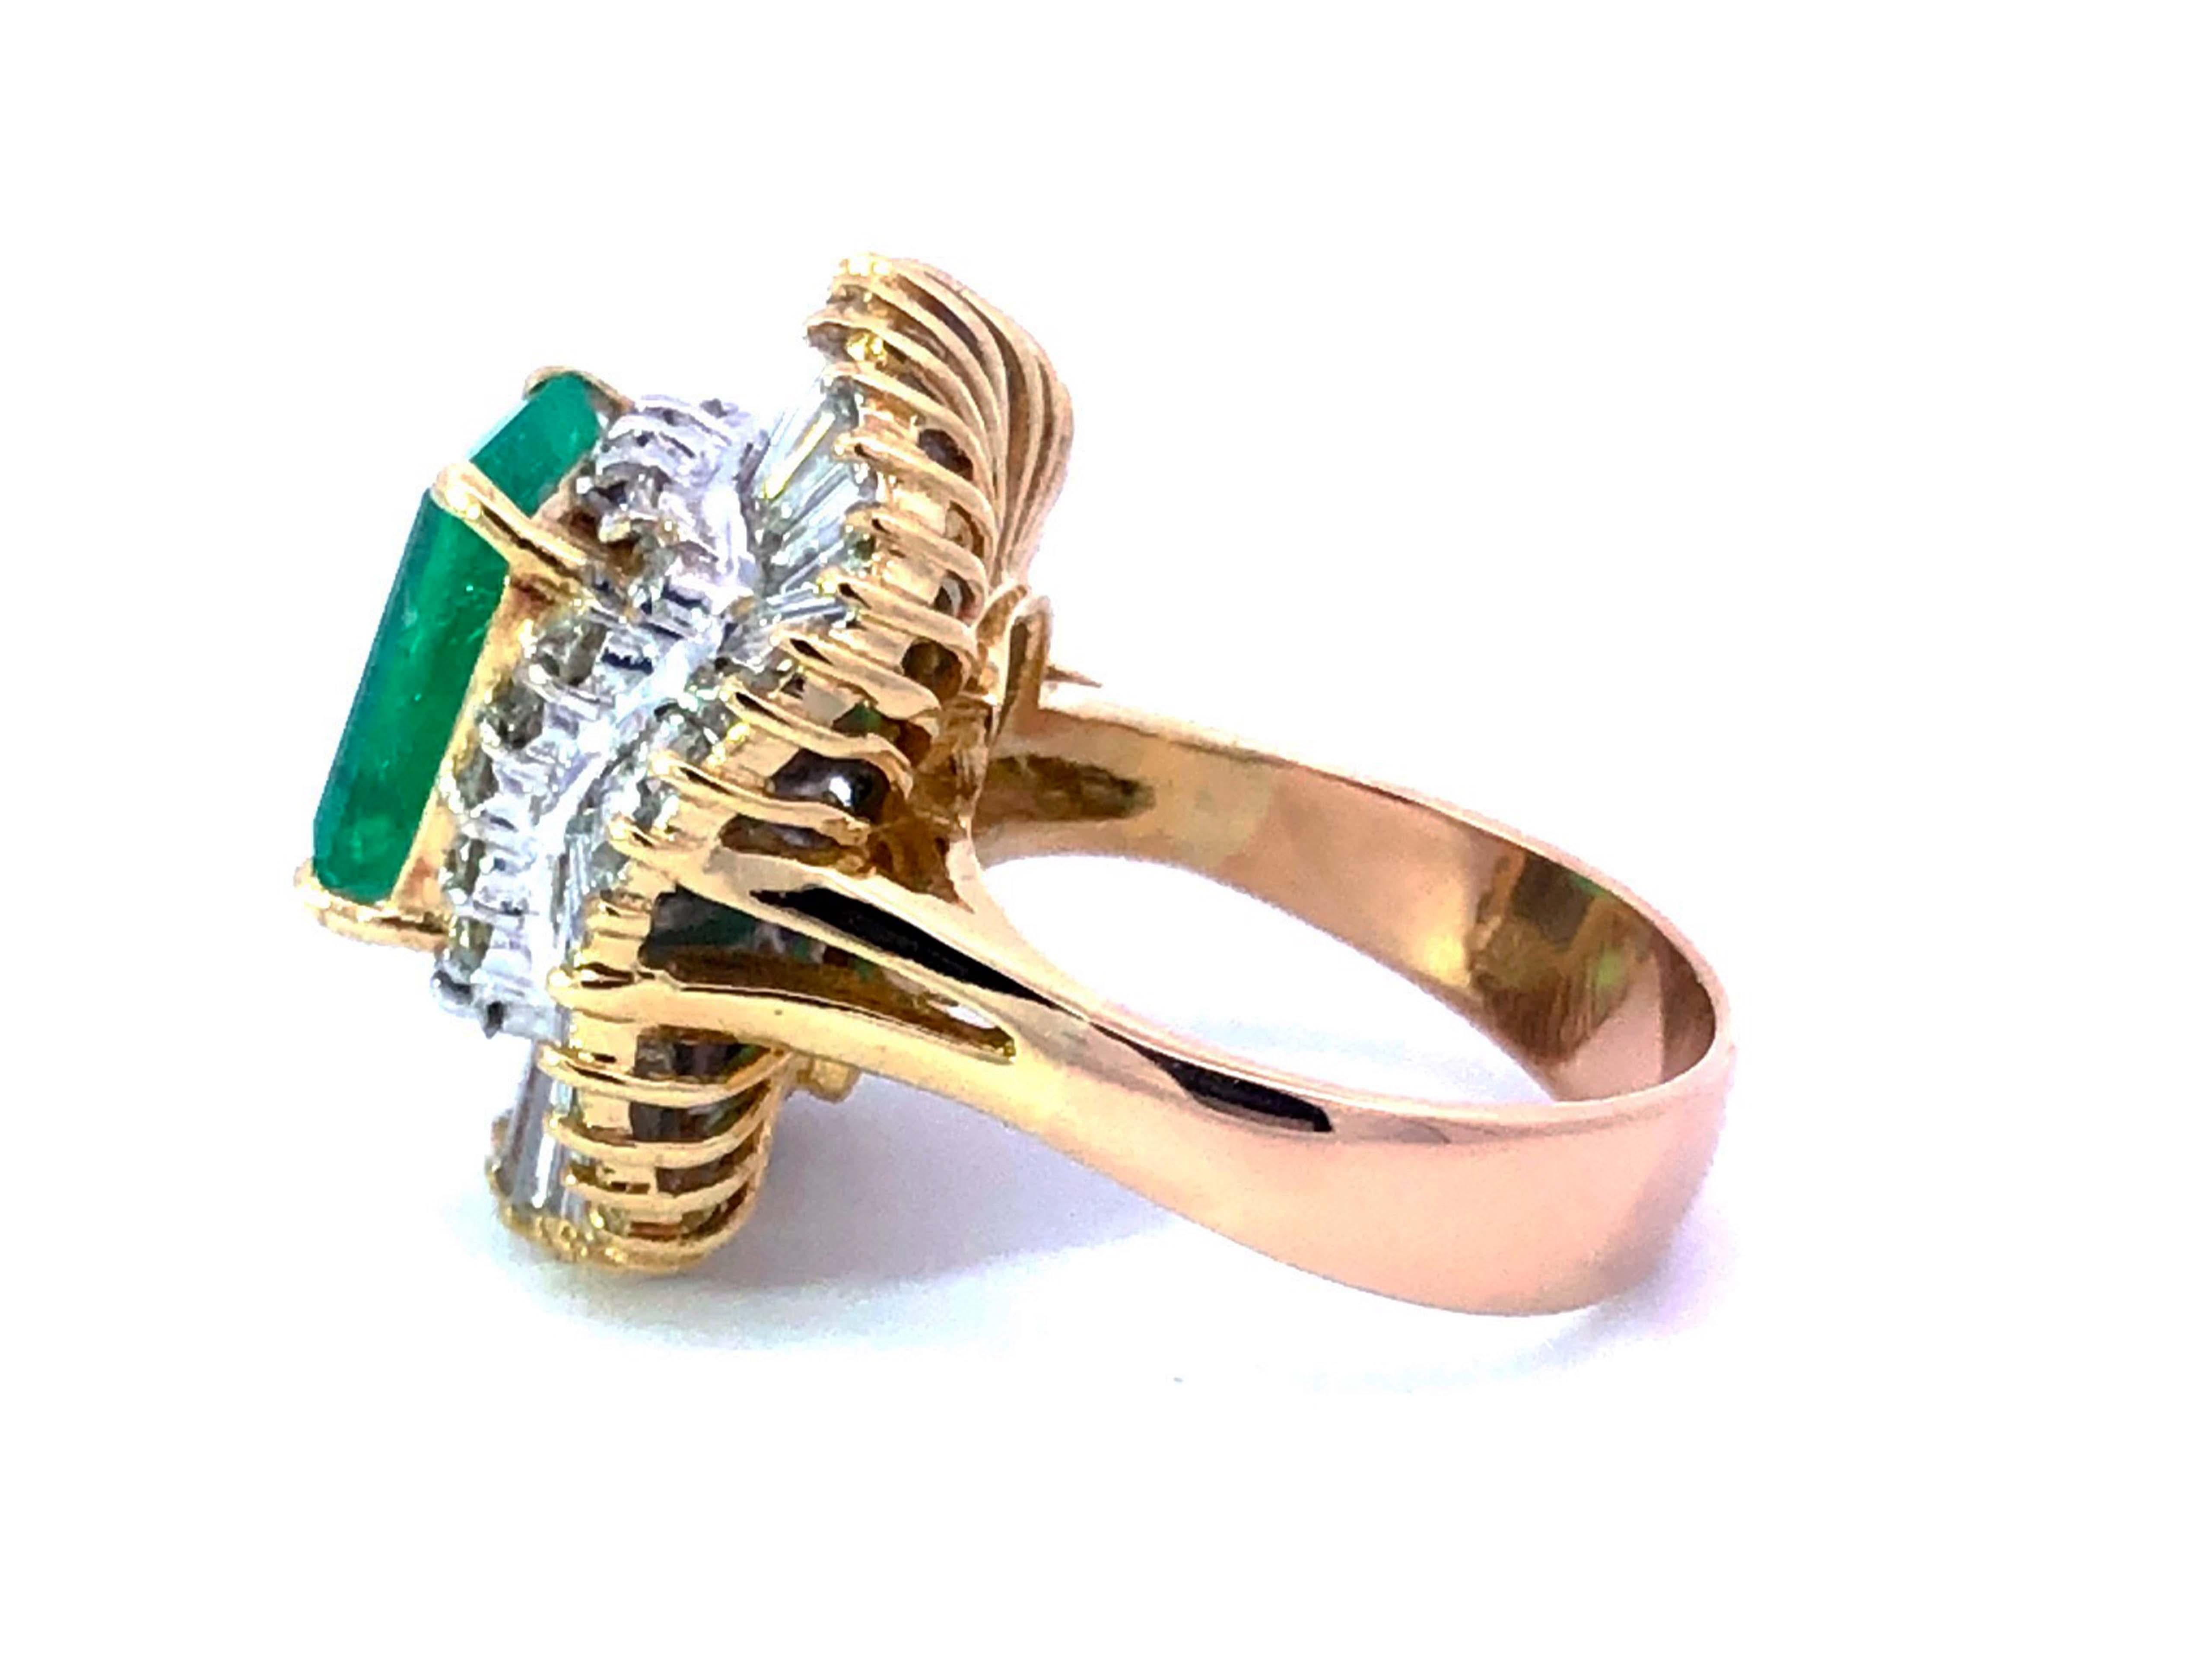 GIA Rare 4 ct. Colombian Emerald & Diamond Ballerina Ring in 18k Yellow Gold For Sale 2